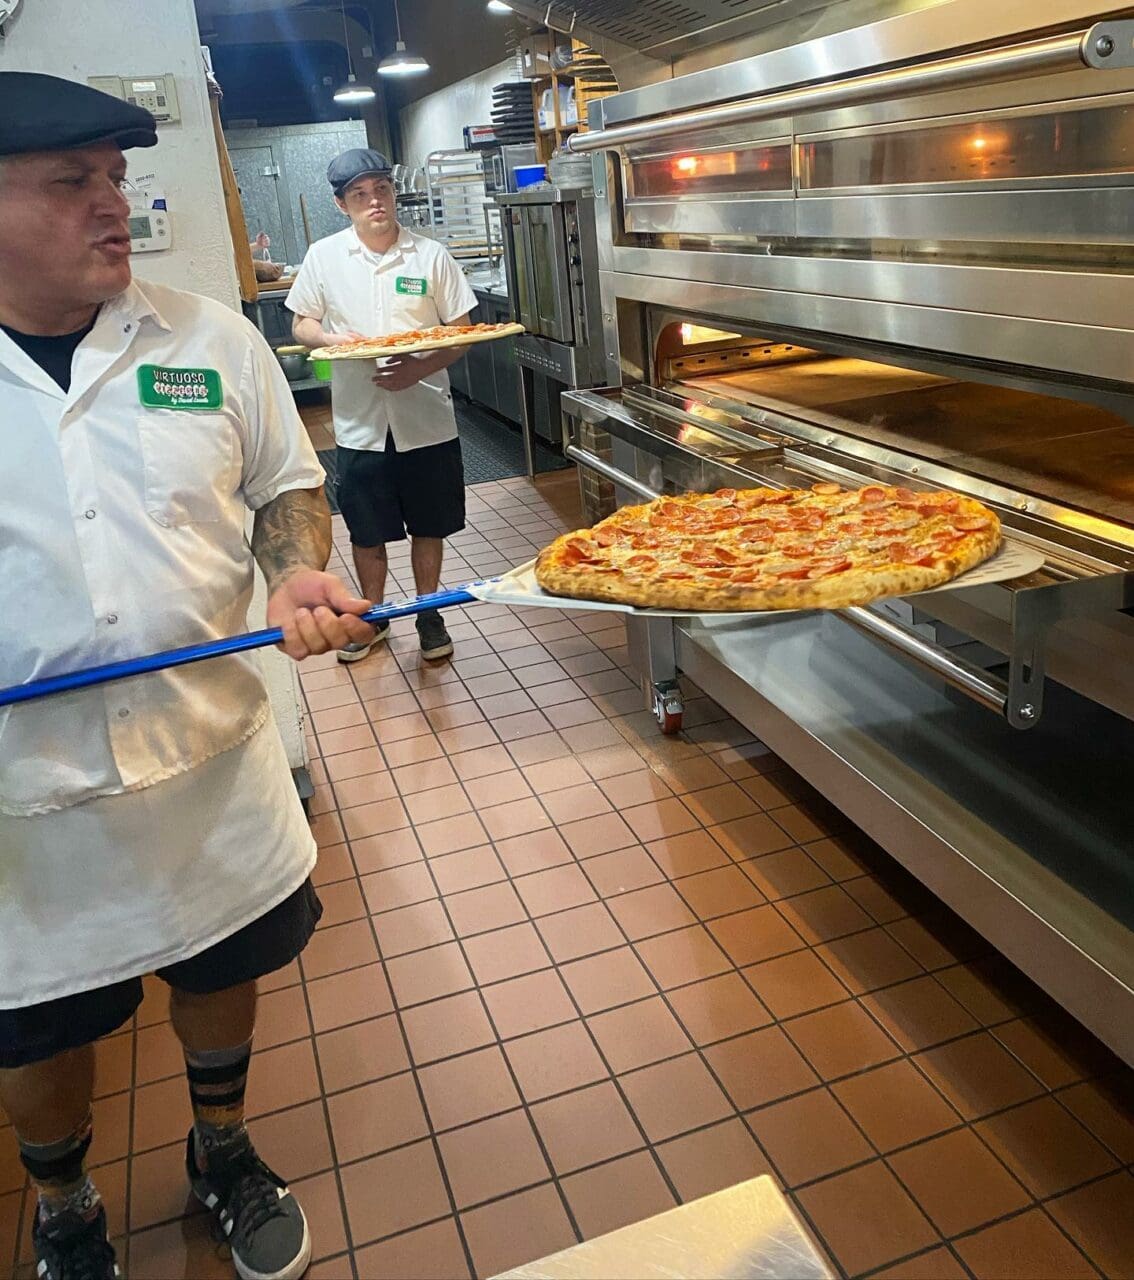 a man with a hat, whit chef's coat, and shorts putting a pizza in the oven.